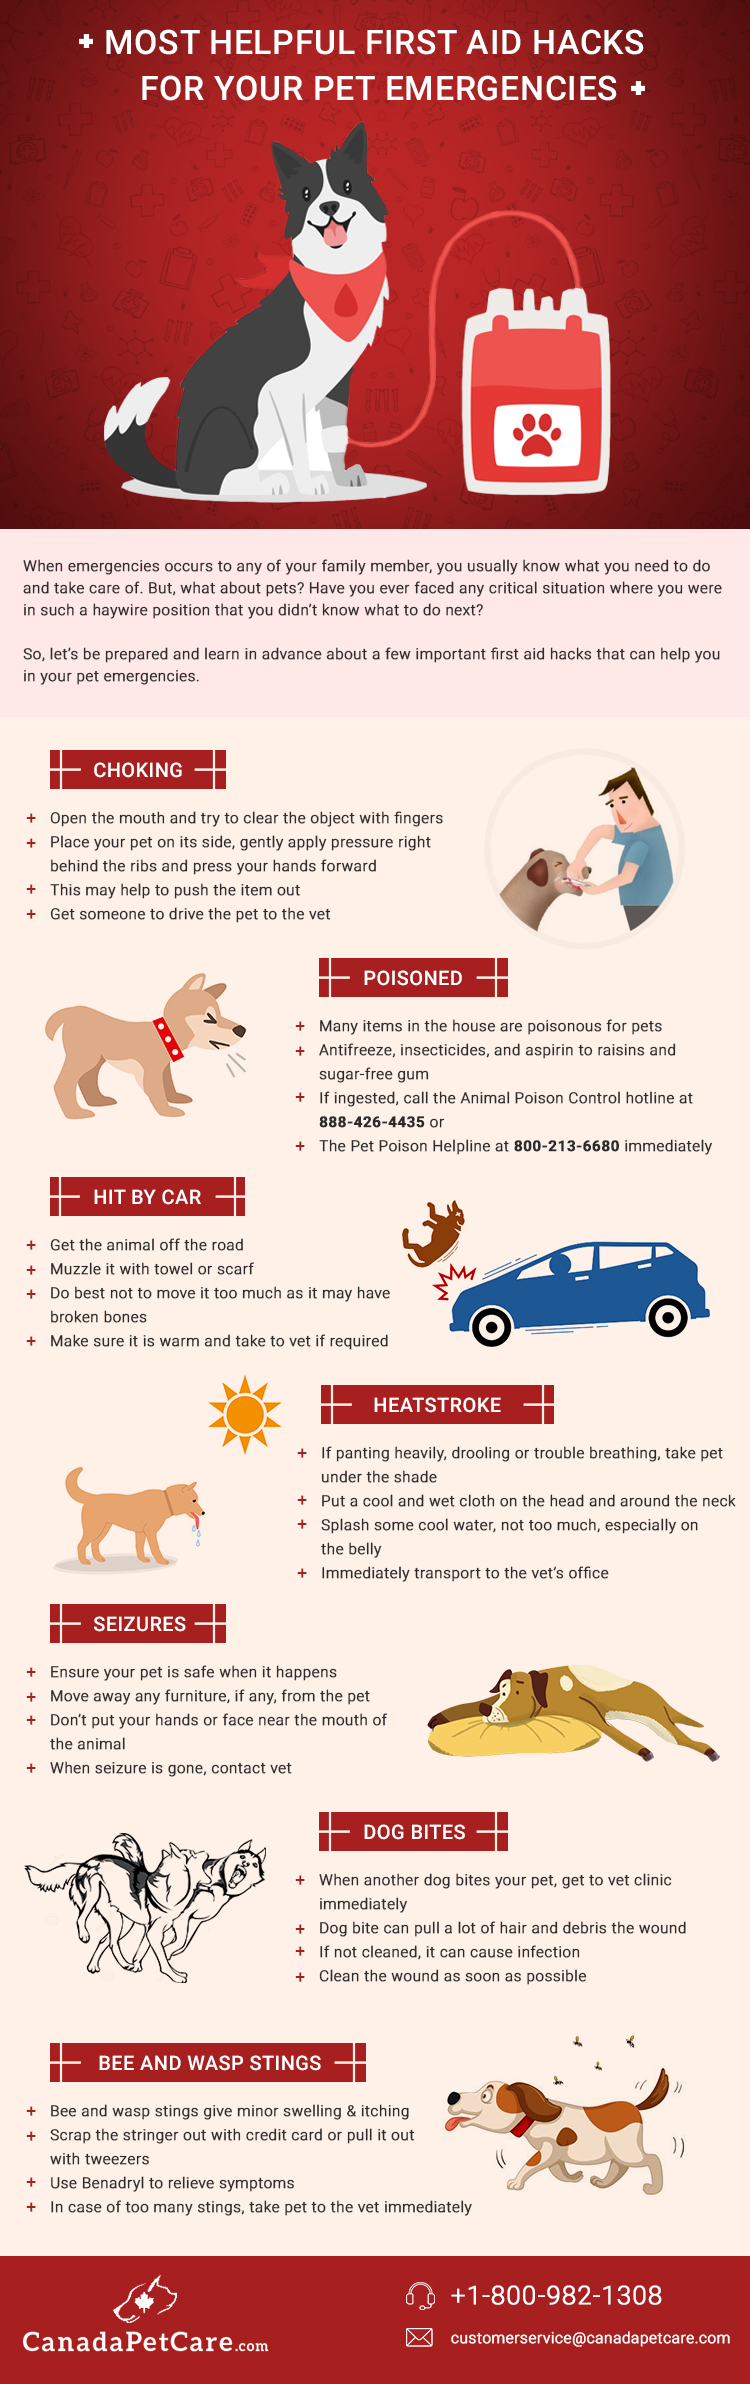 Most Helpful First Aid Hacks for Your Pet Emergencies